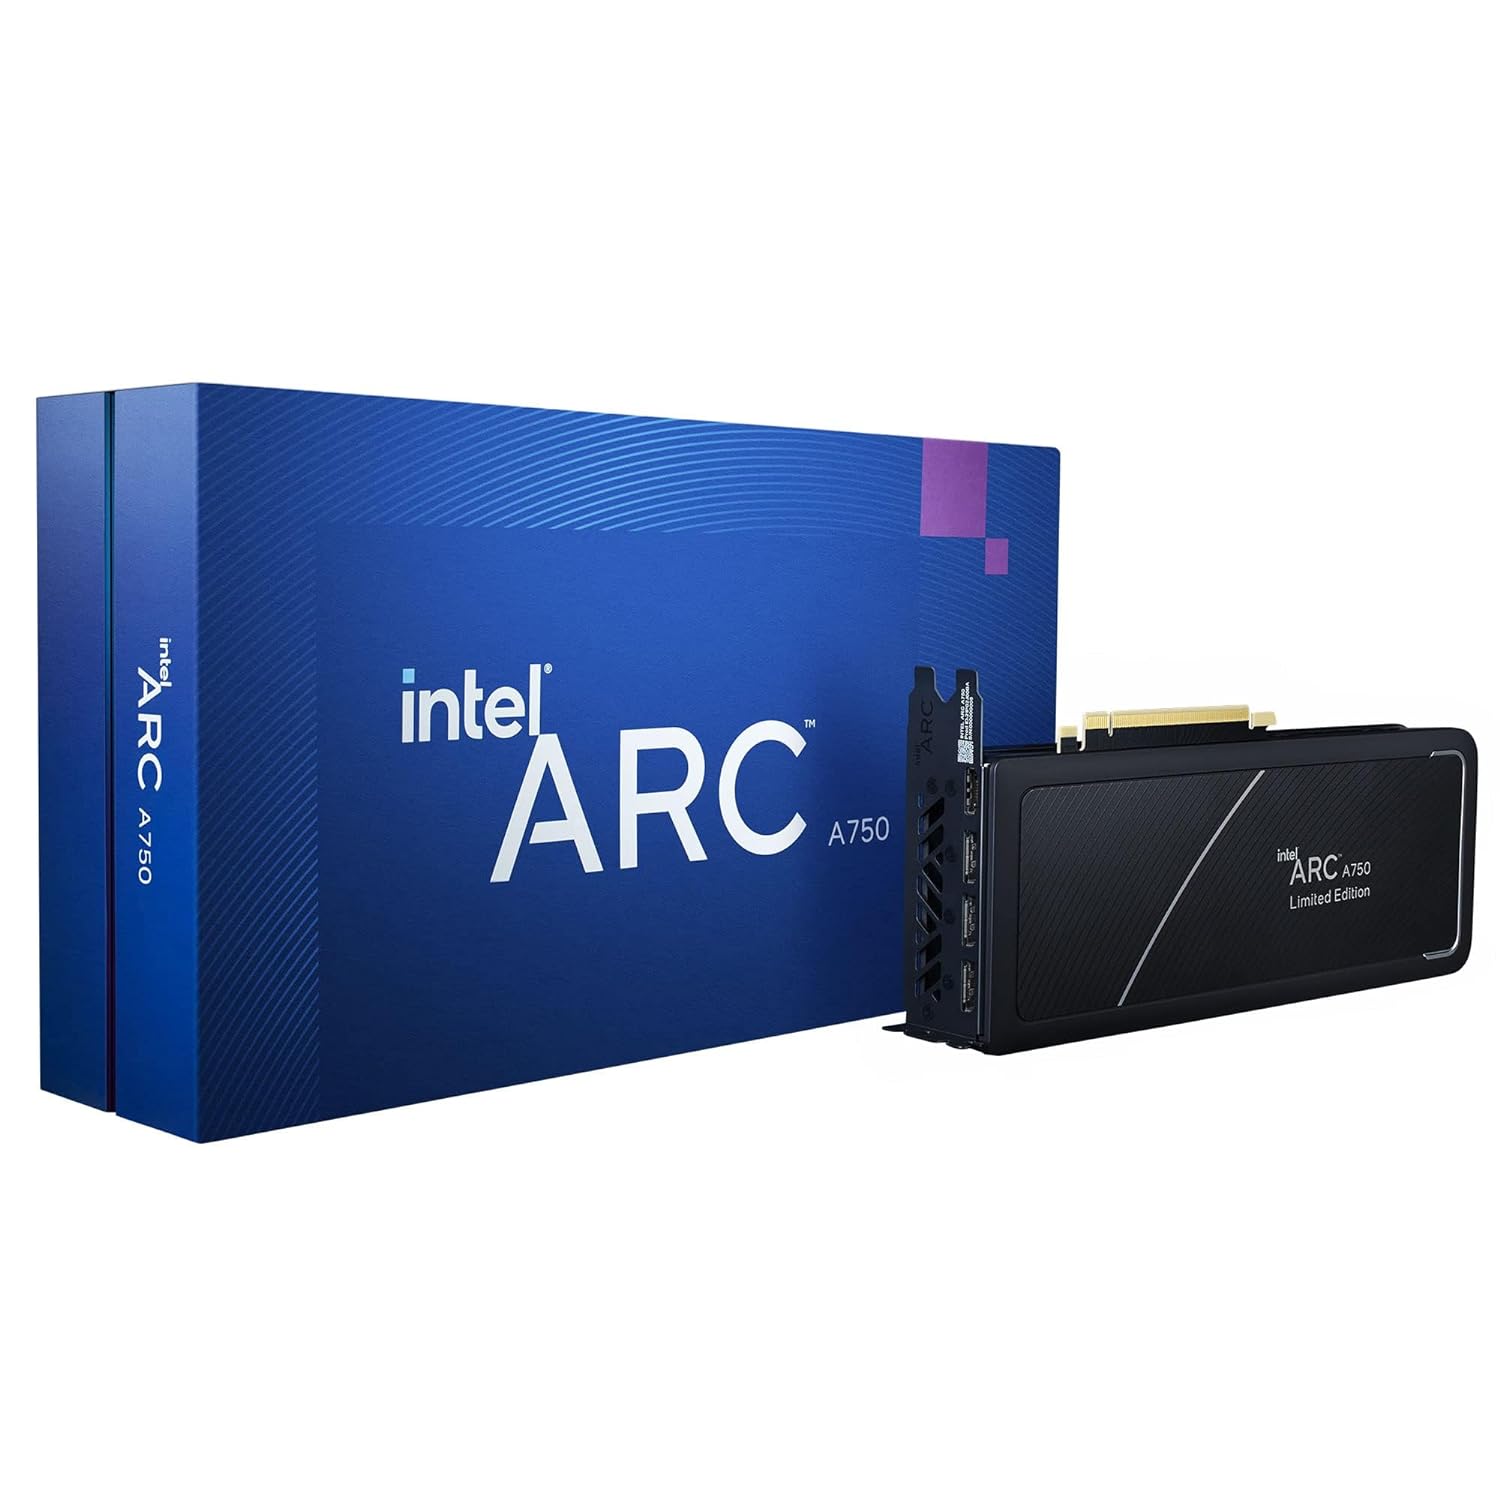 Intel Arc A750 8Gb Pci Express 4.0 DDR6 Graphics Card-GRAPHICS CARD-INTEL-computerspace